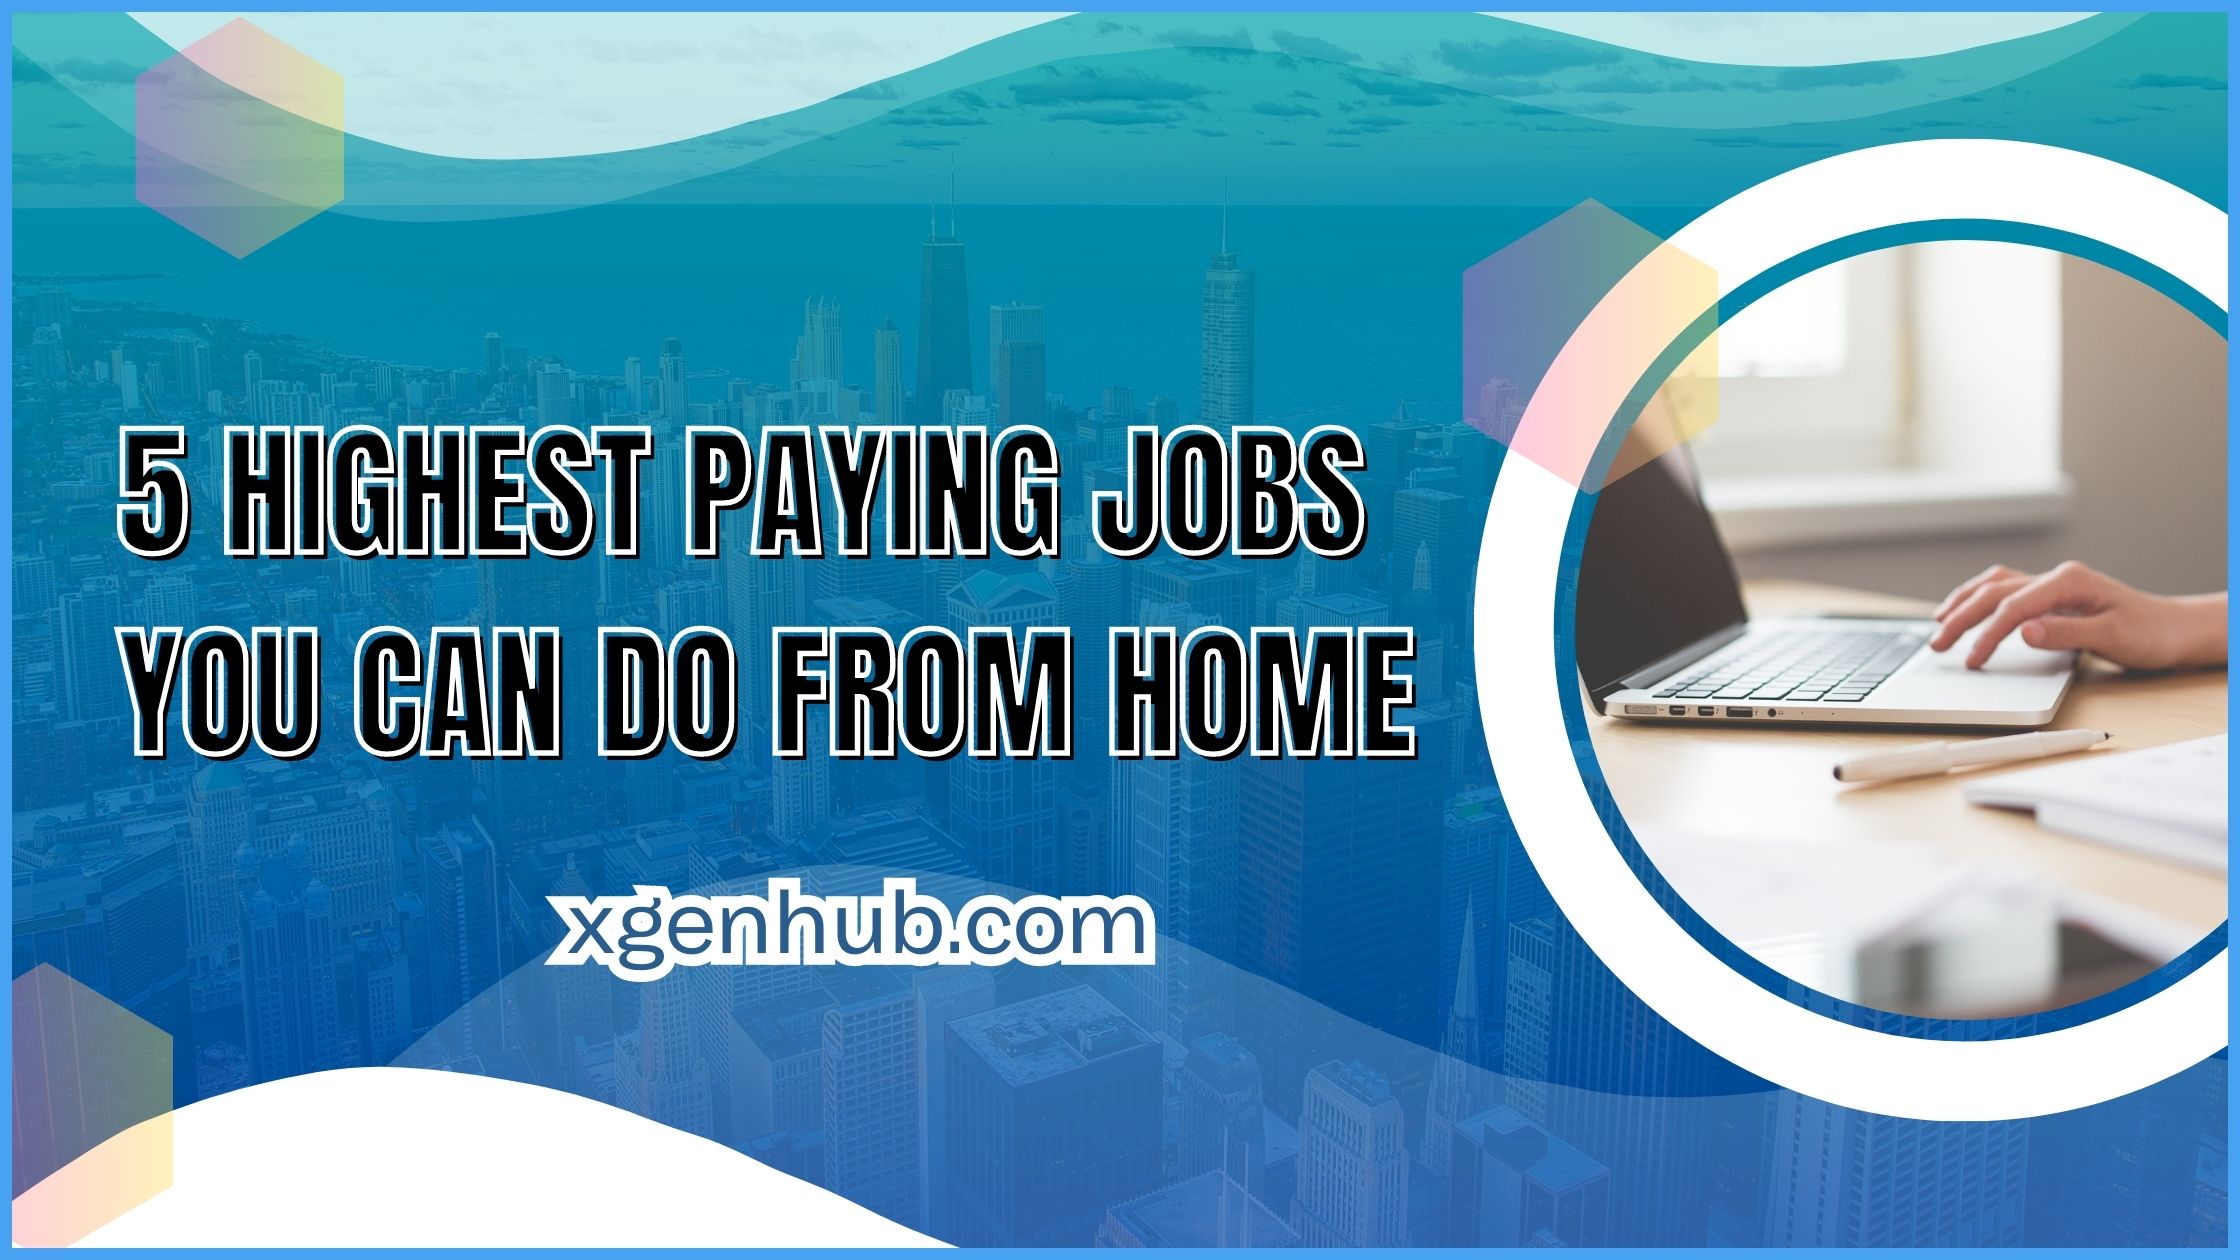 5 Highest Paying Jobs You Can Do From Home